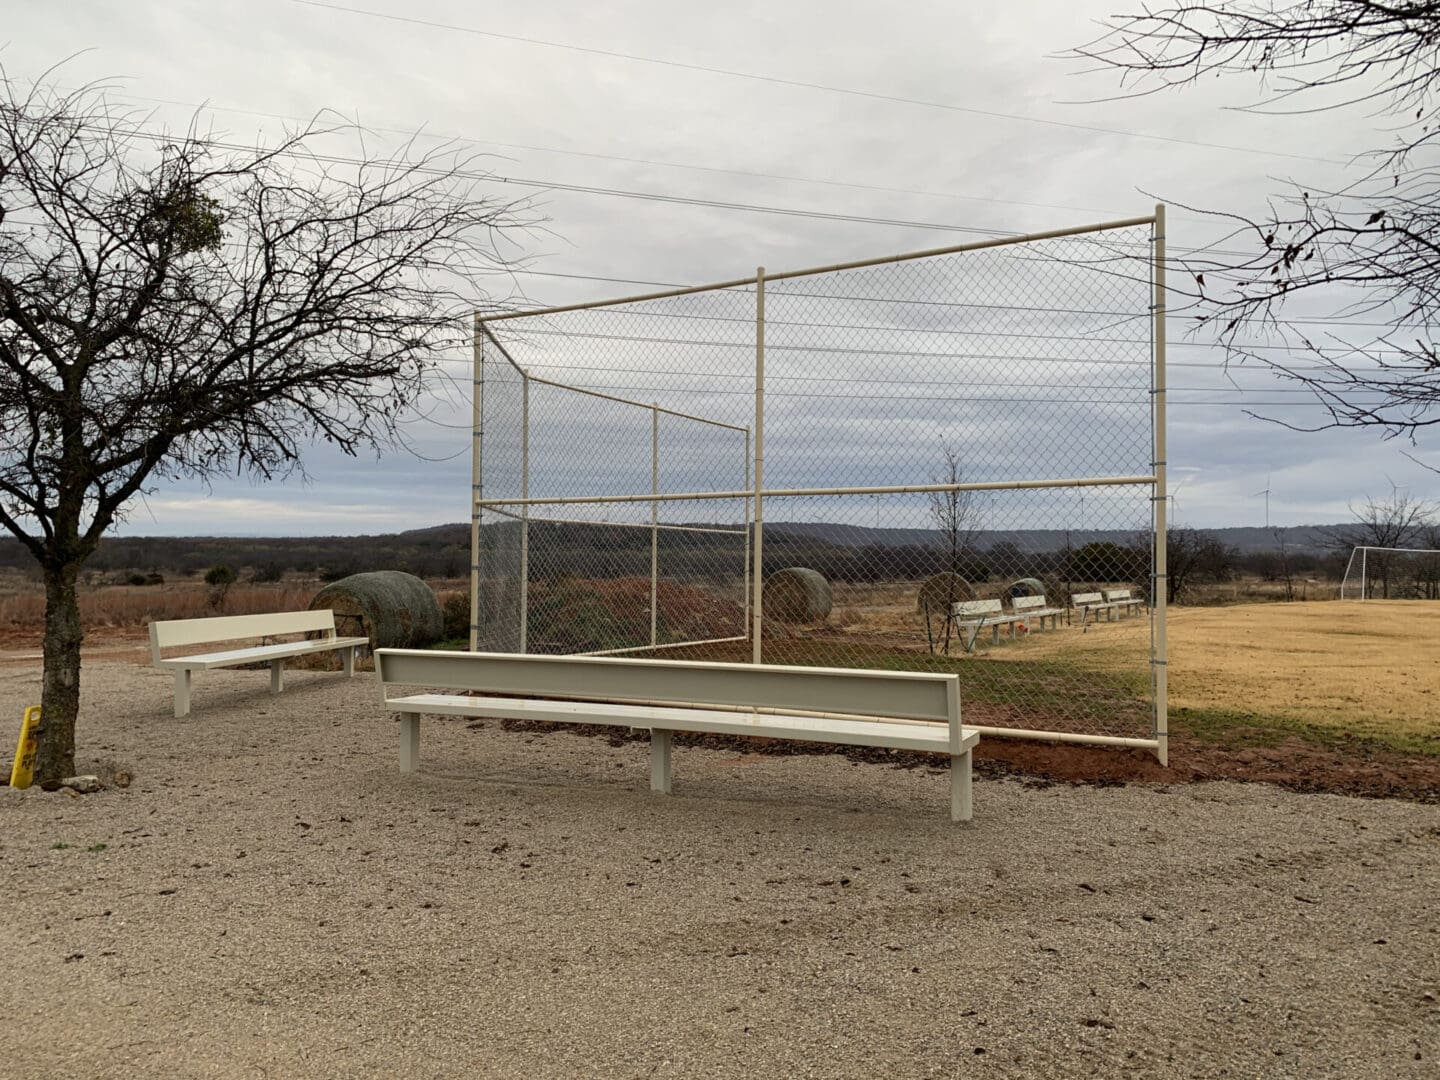 Two benches for seating at the baseball court